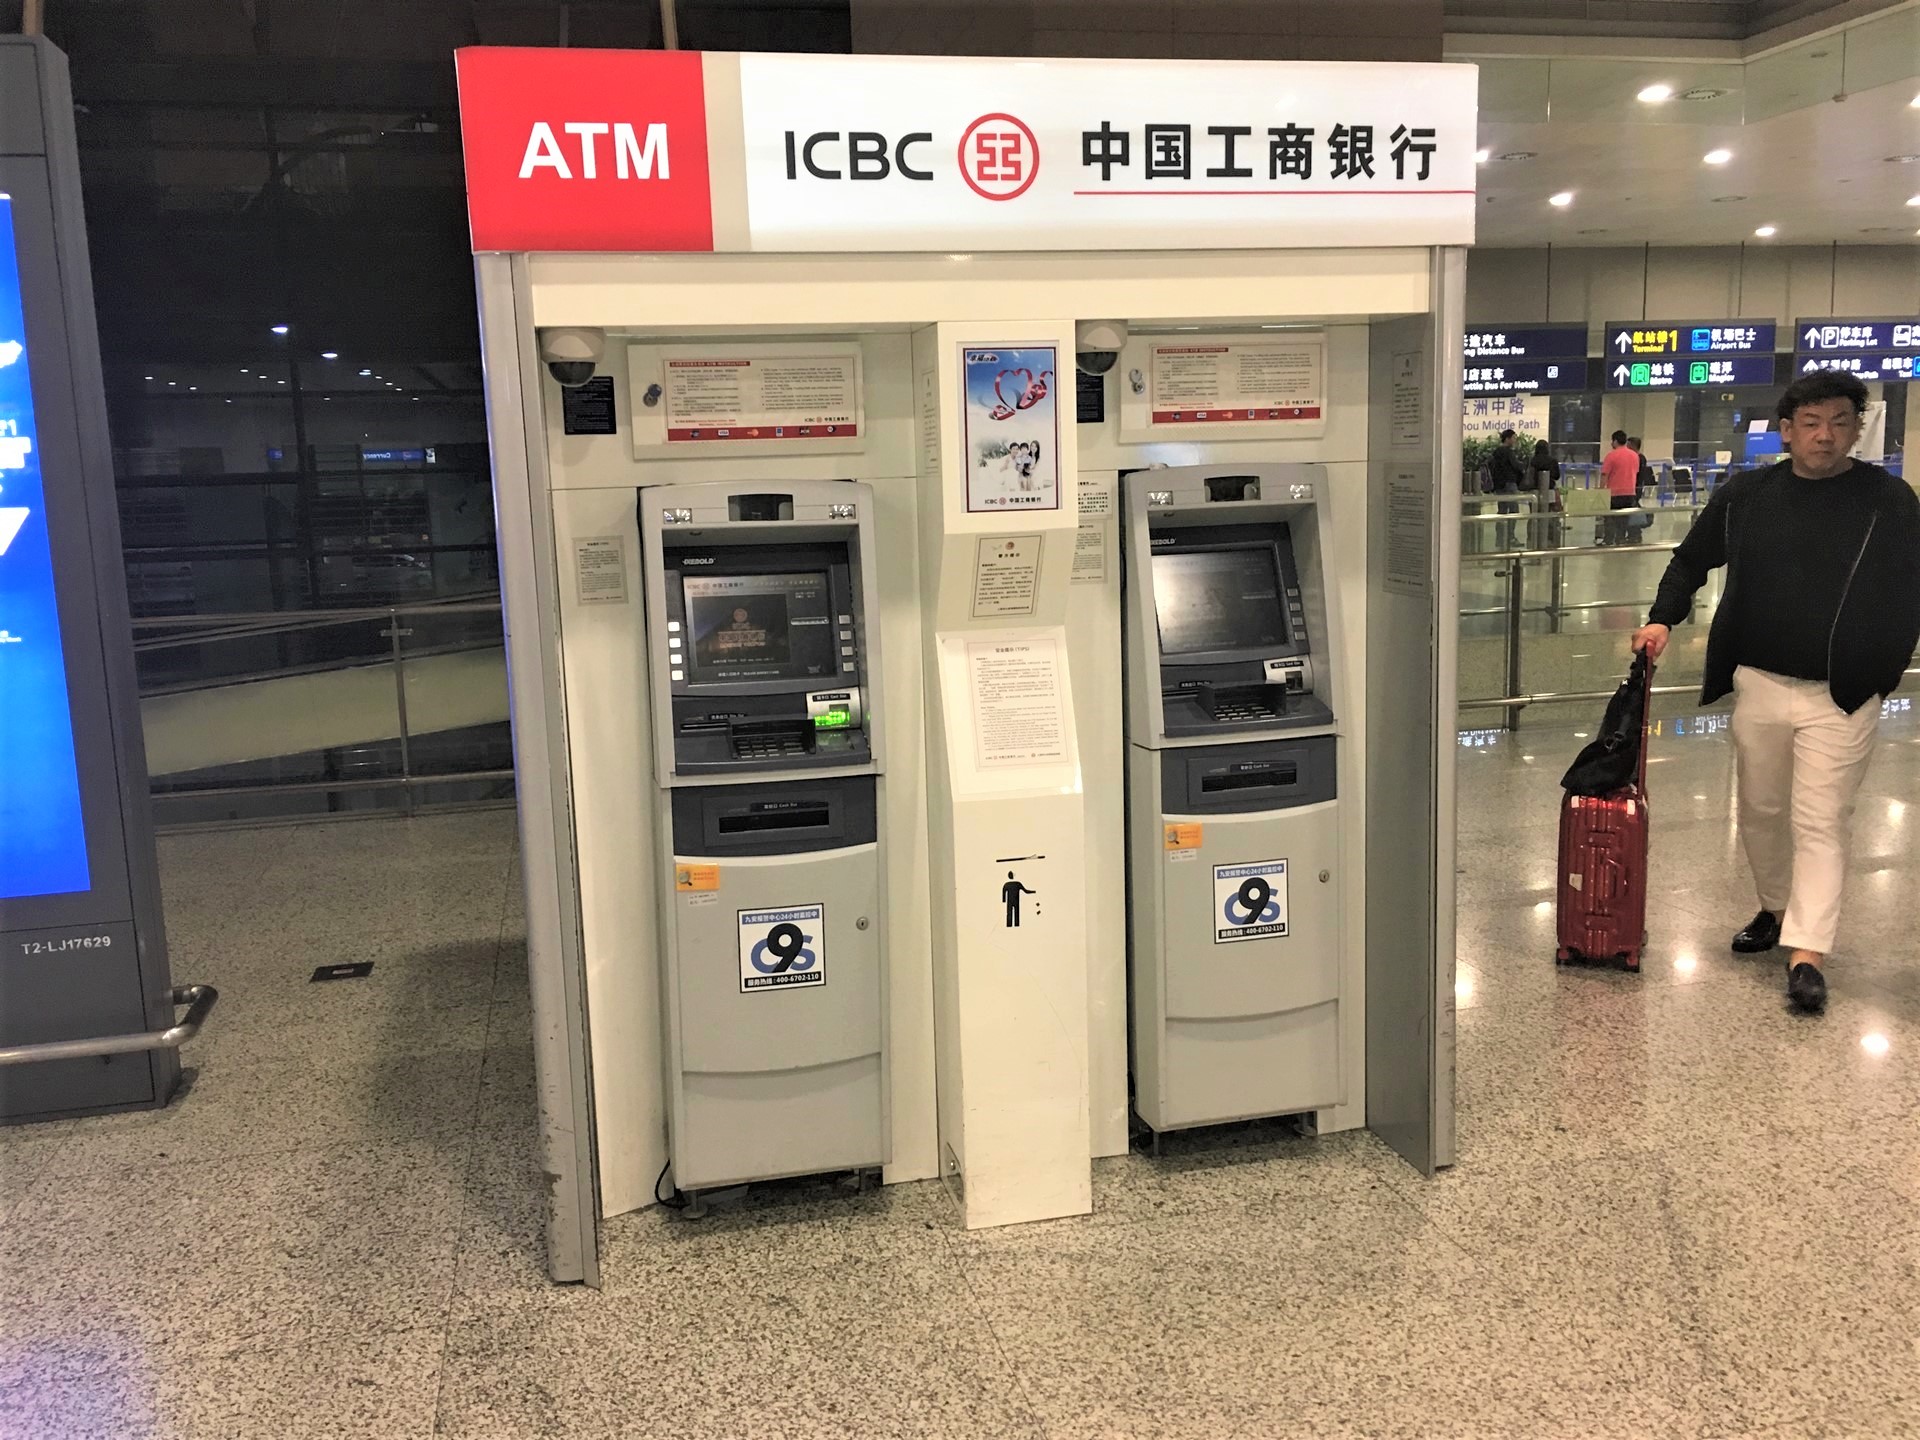 ICBC中国工商銀行のATM